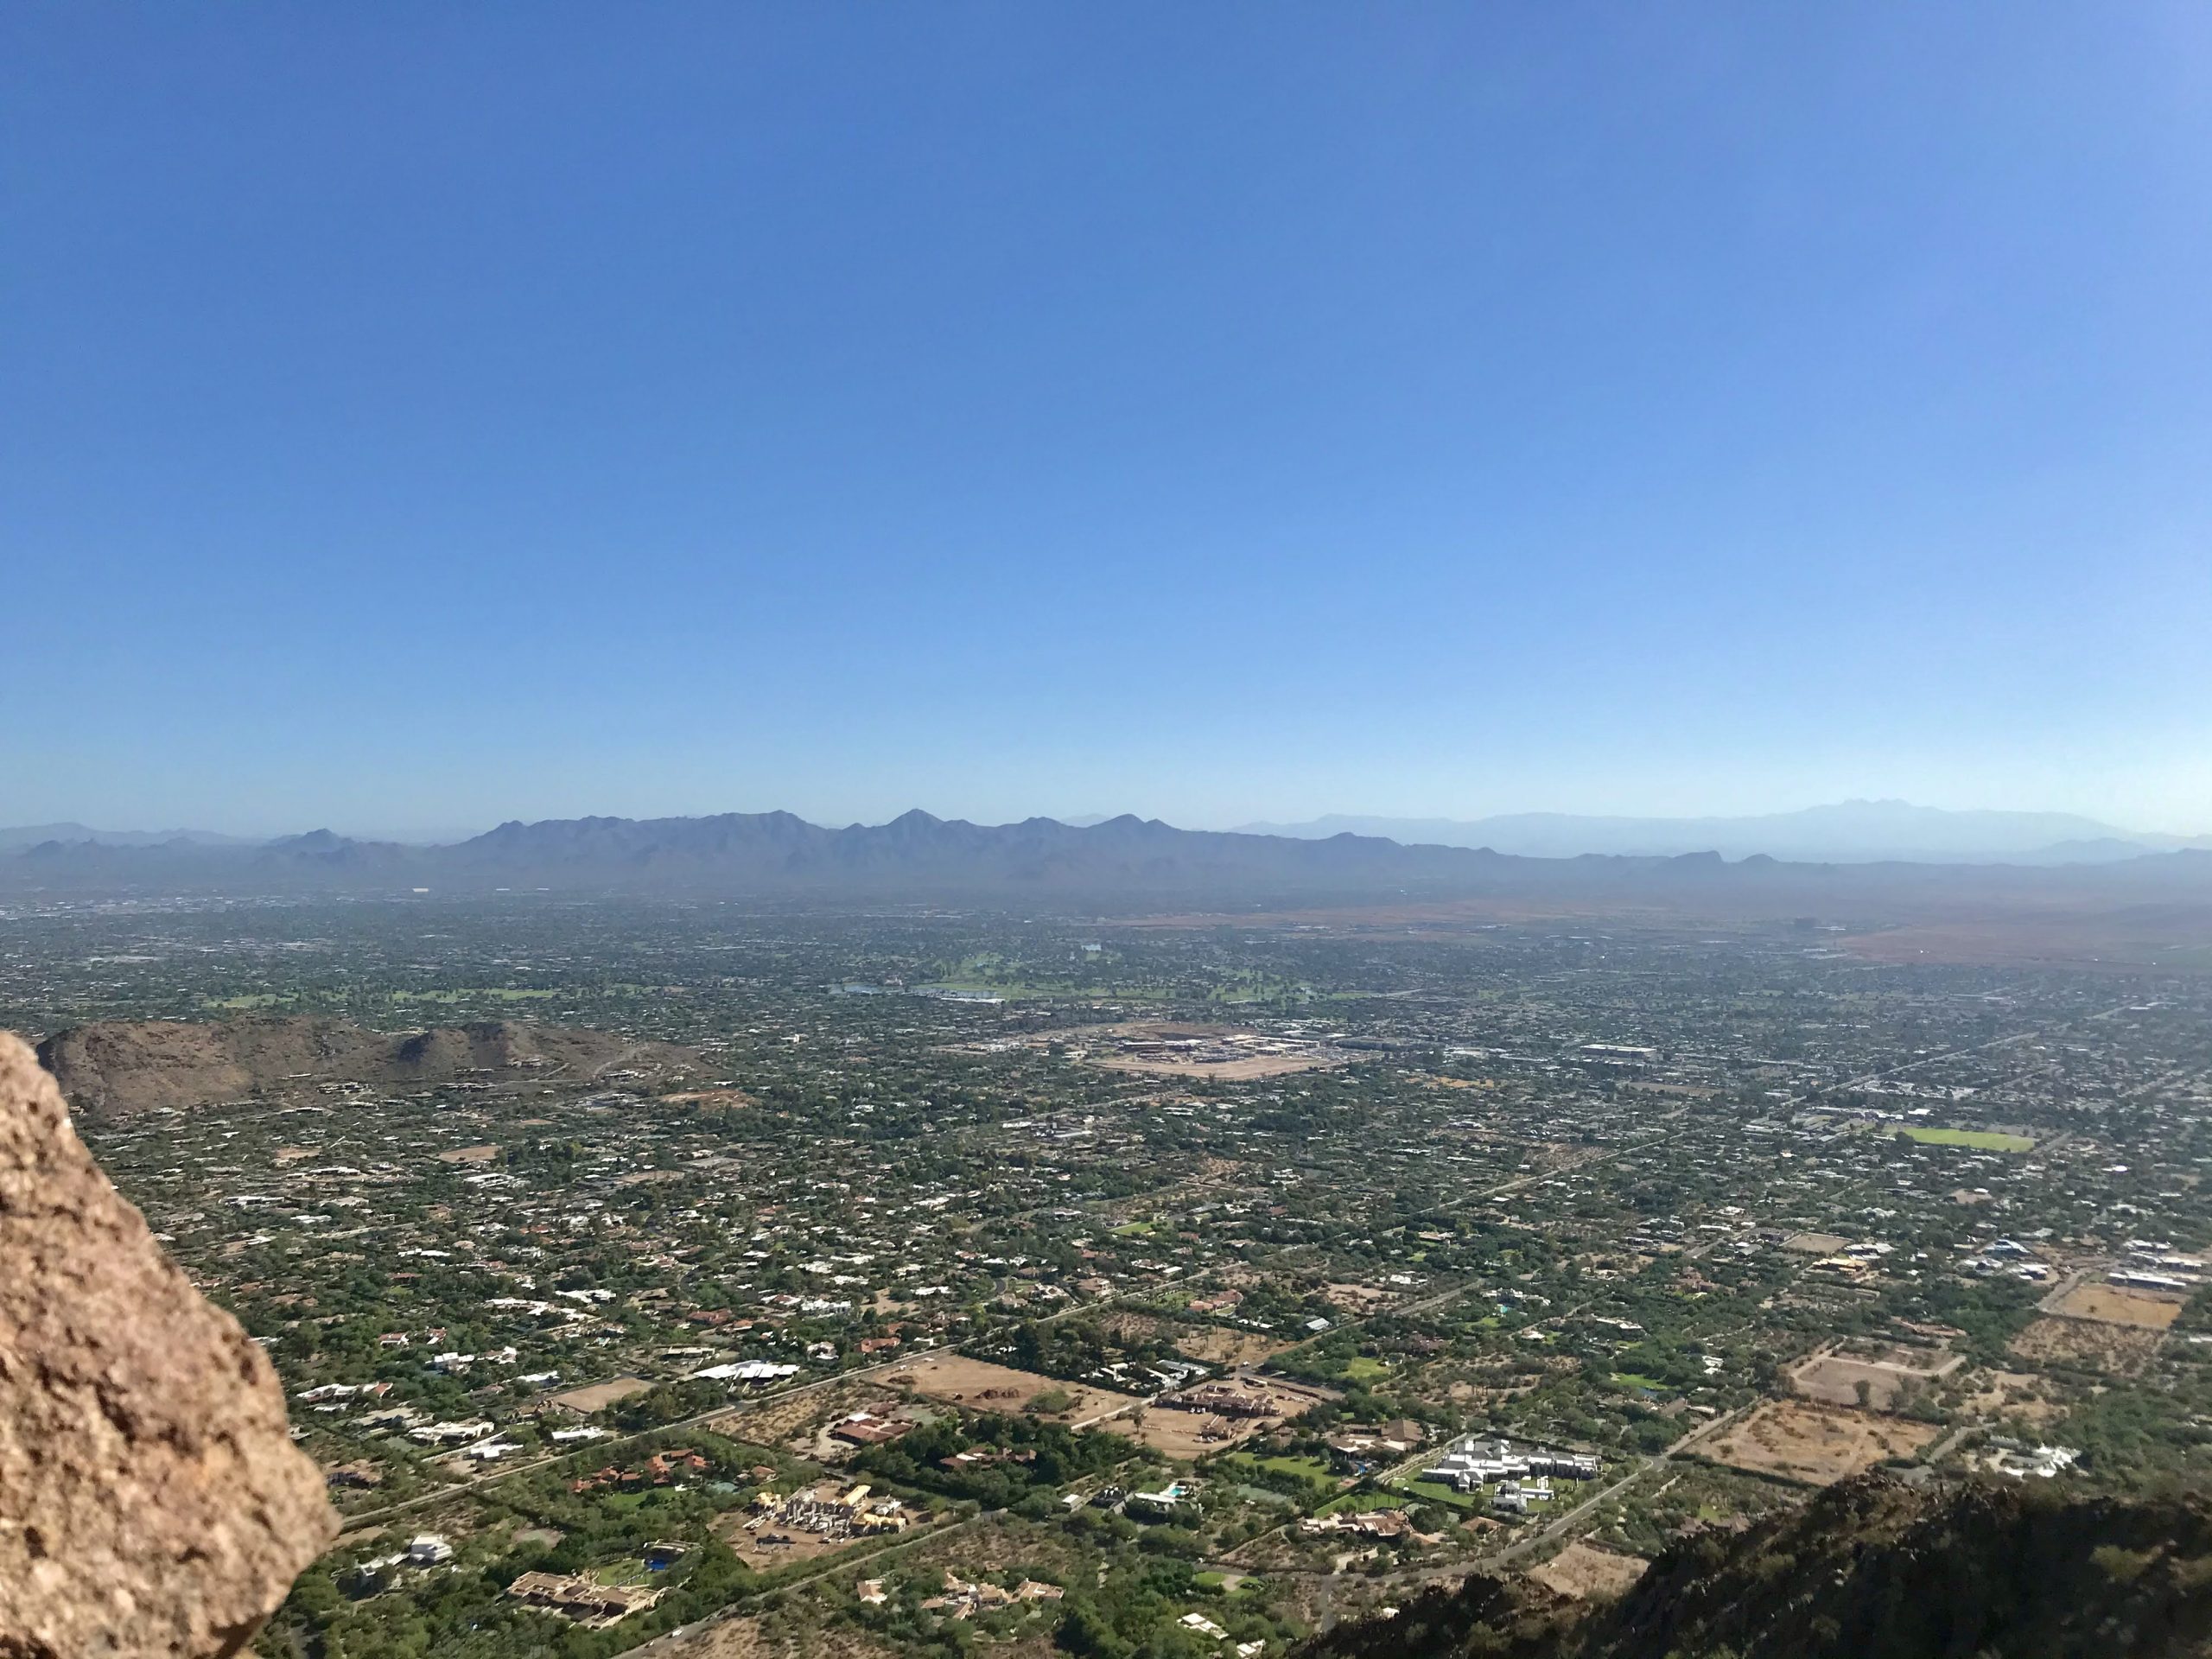 Piestewa vs Camelback? Which should you hike?